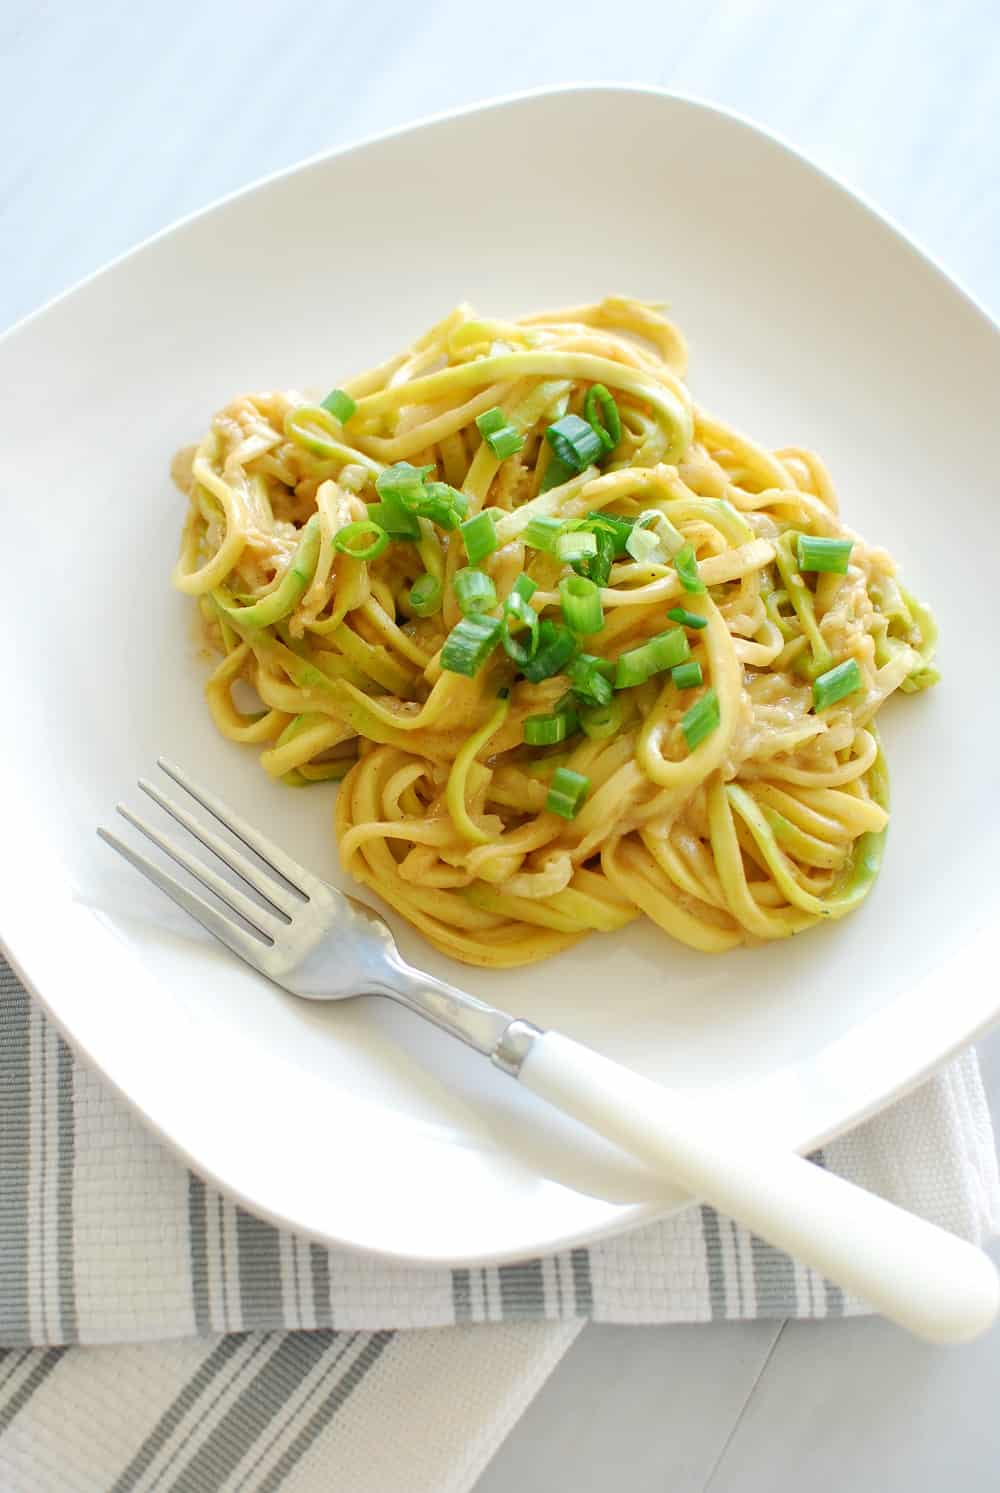 Zucchini noodles with almond butter sauce